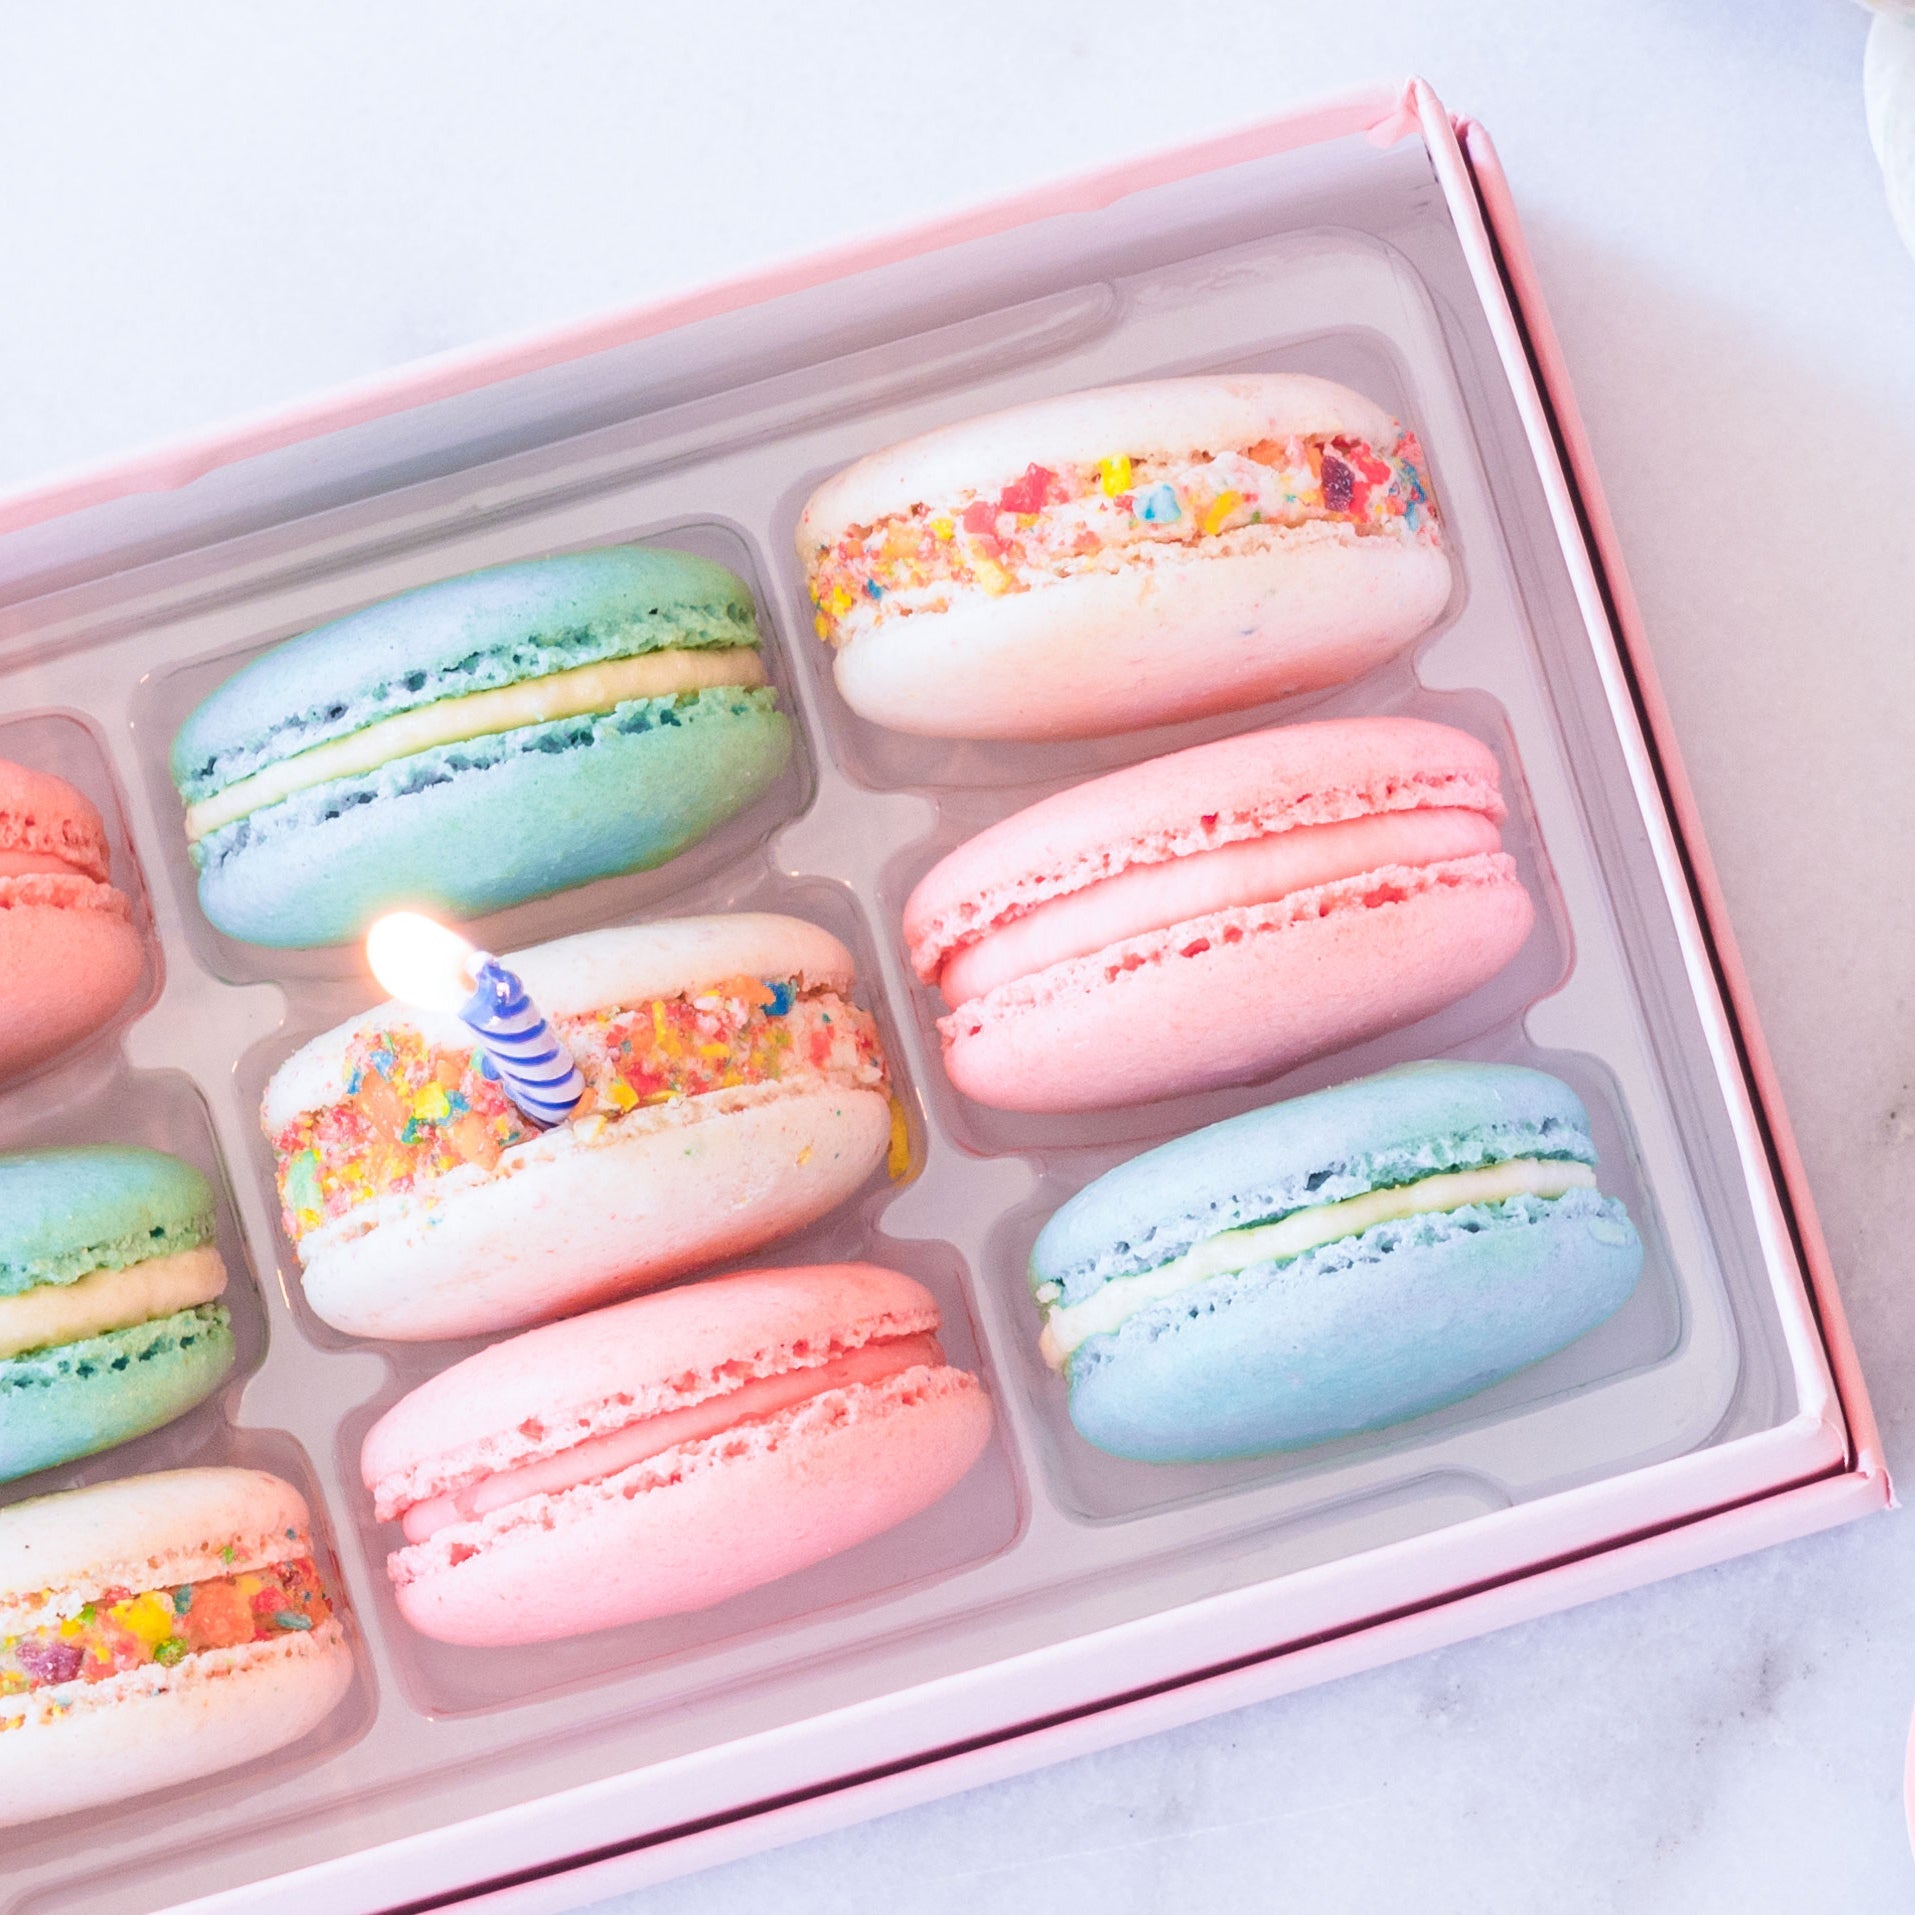 Treat Yourself 2018: How We're Having Fun This Month - Olivia Macaron